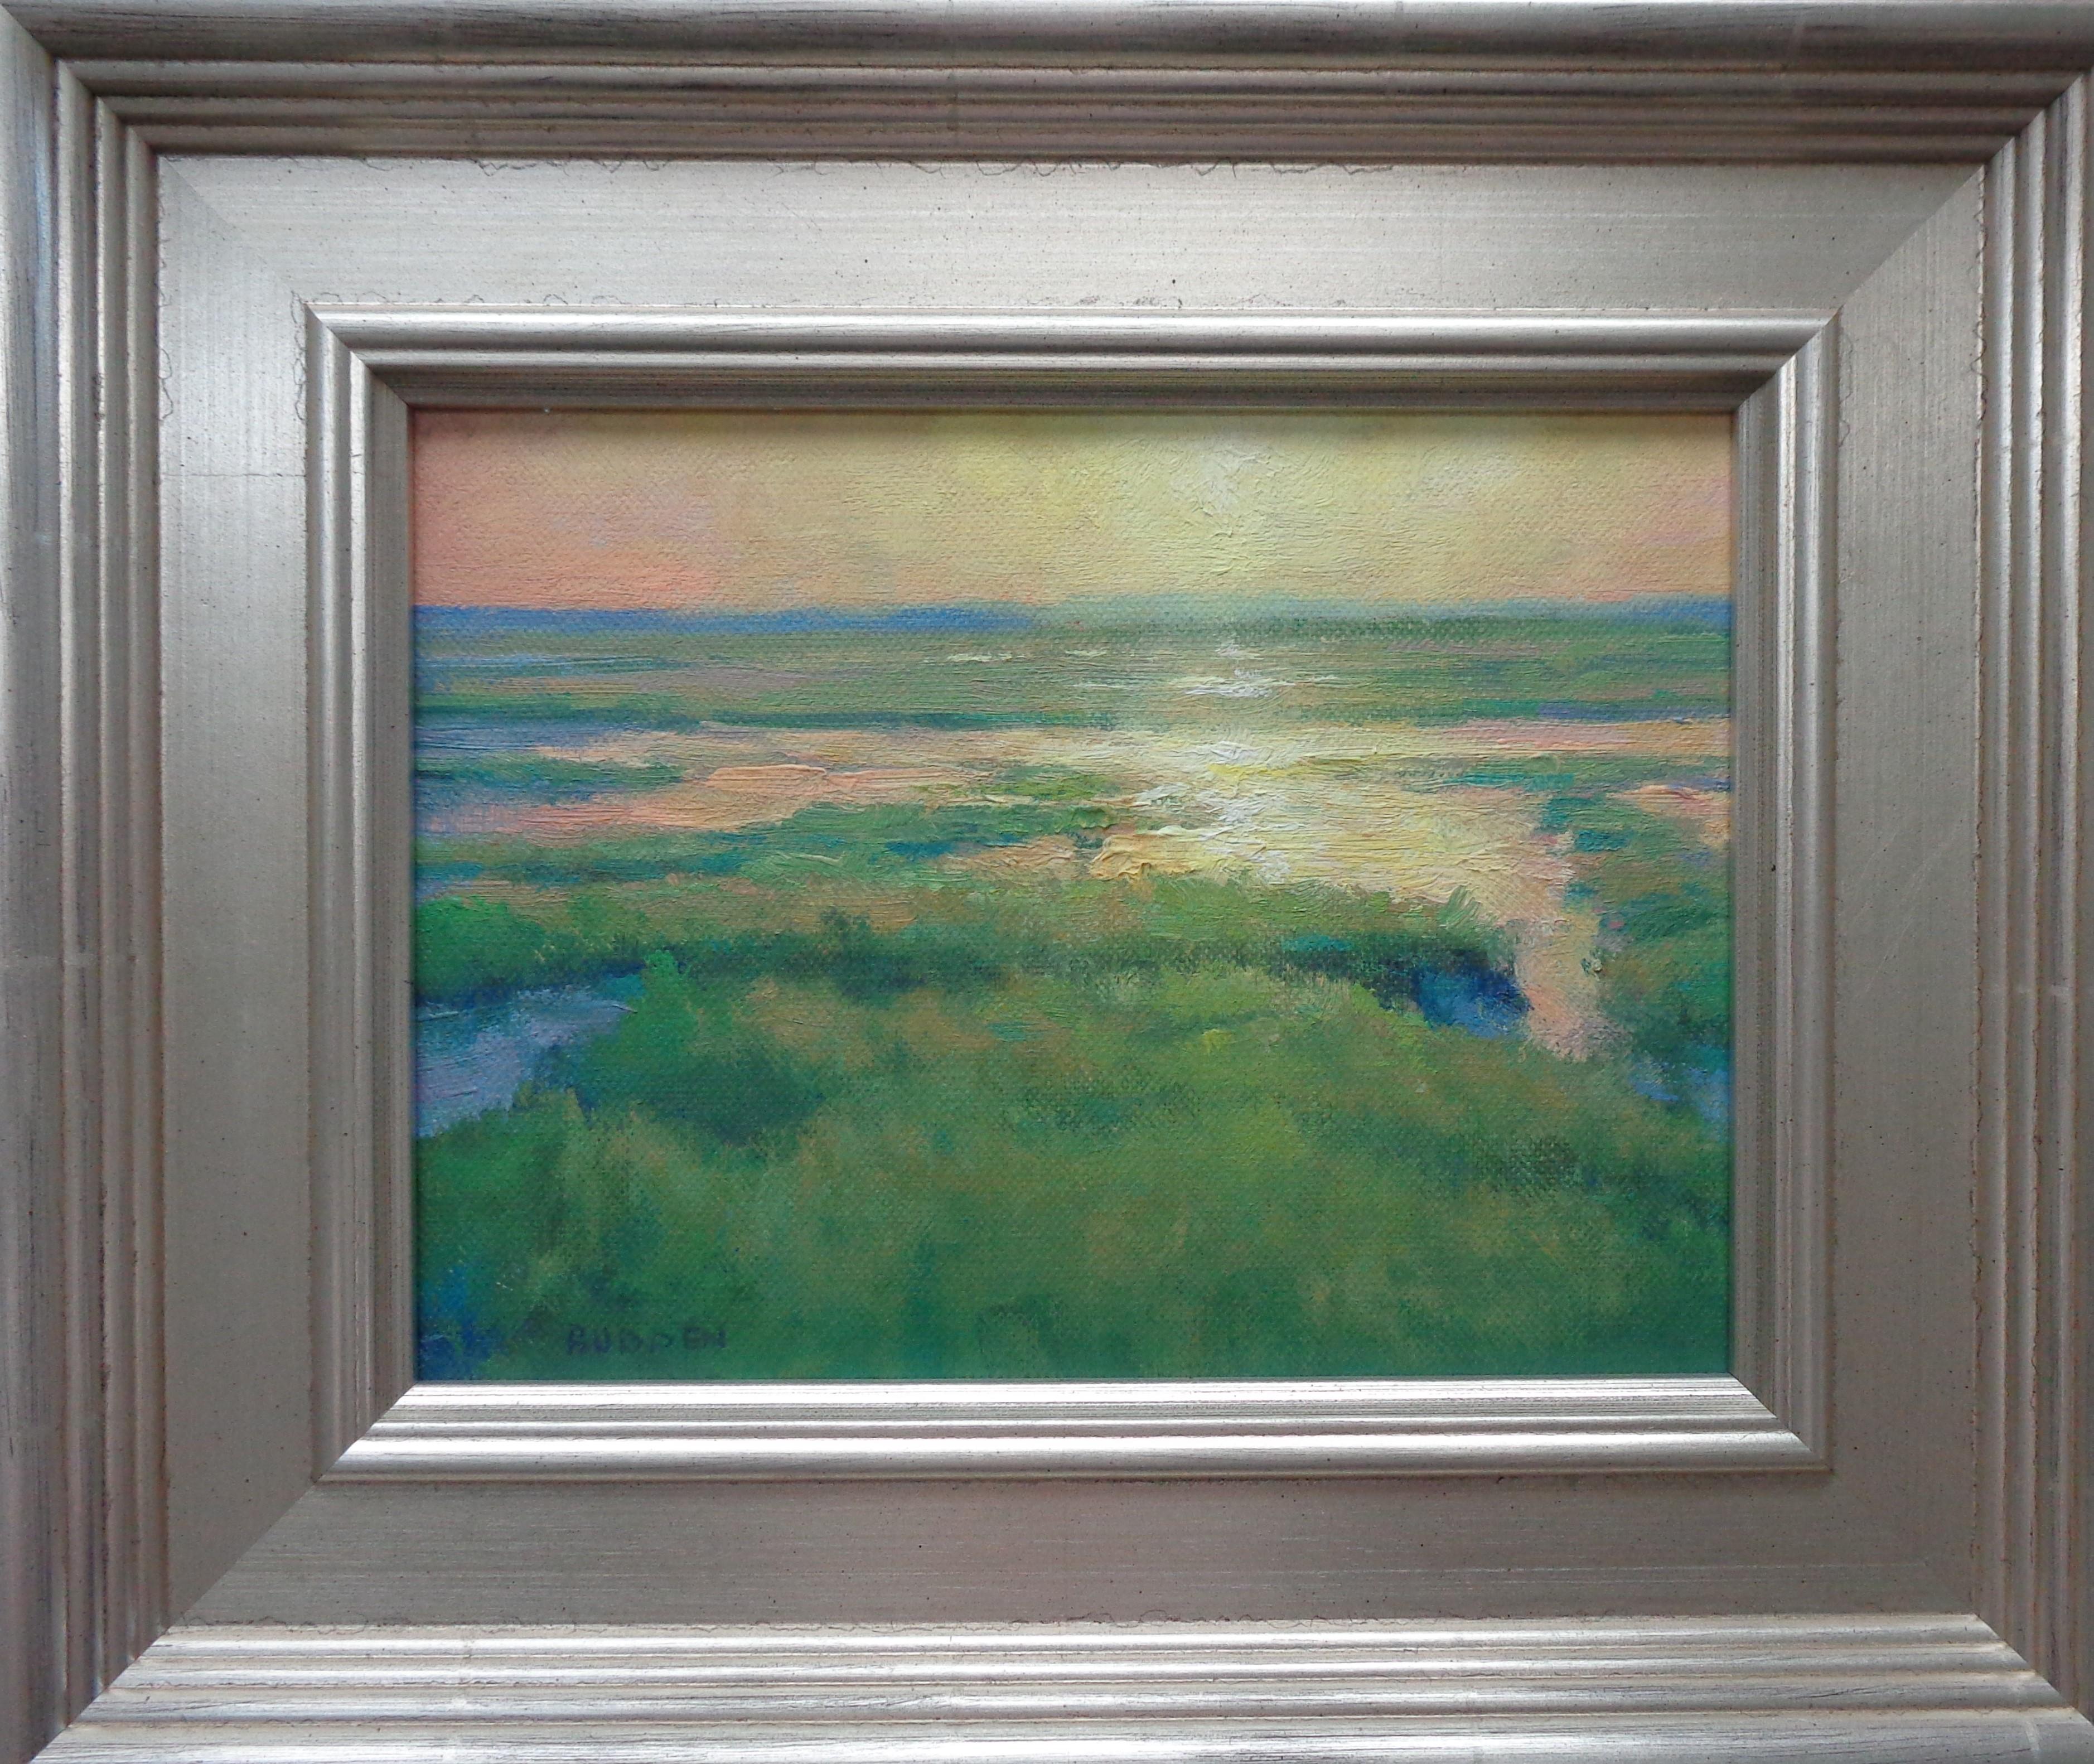 Morning Marsh Light  is an oil painting on canvas panel by award winning contemporary artist Michael Budden that showcases a beautiful sunrise awakening a glorious marsh view. This painting is new and the image measures 6 x 8 and is one of a